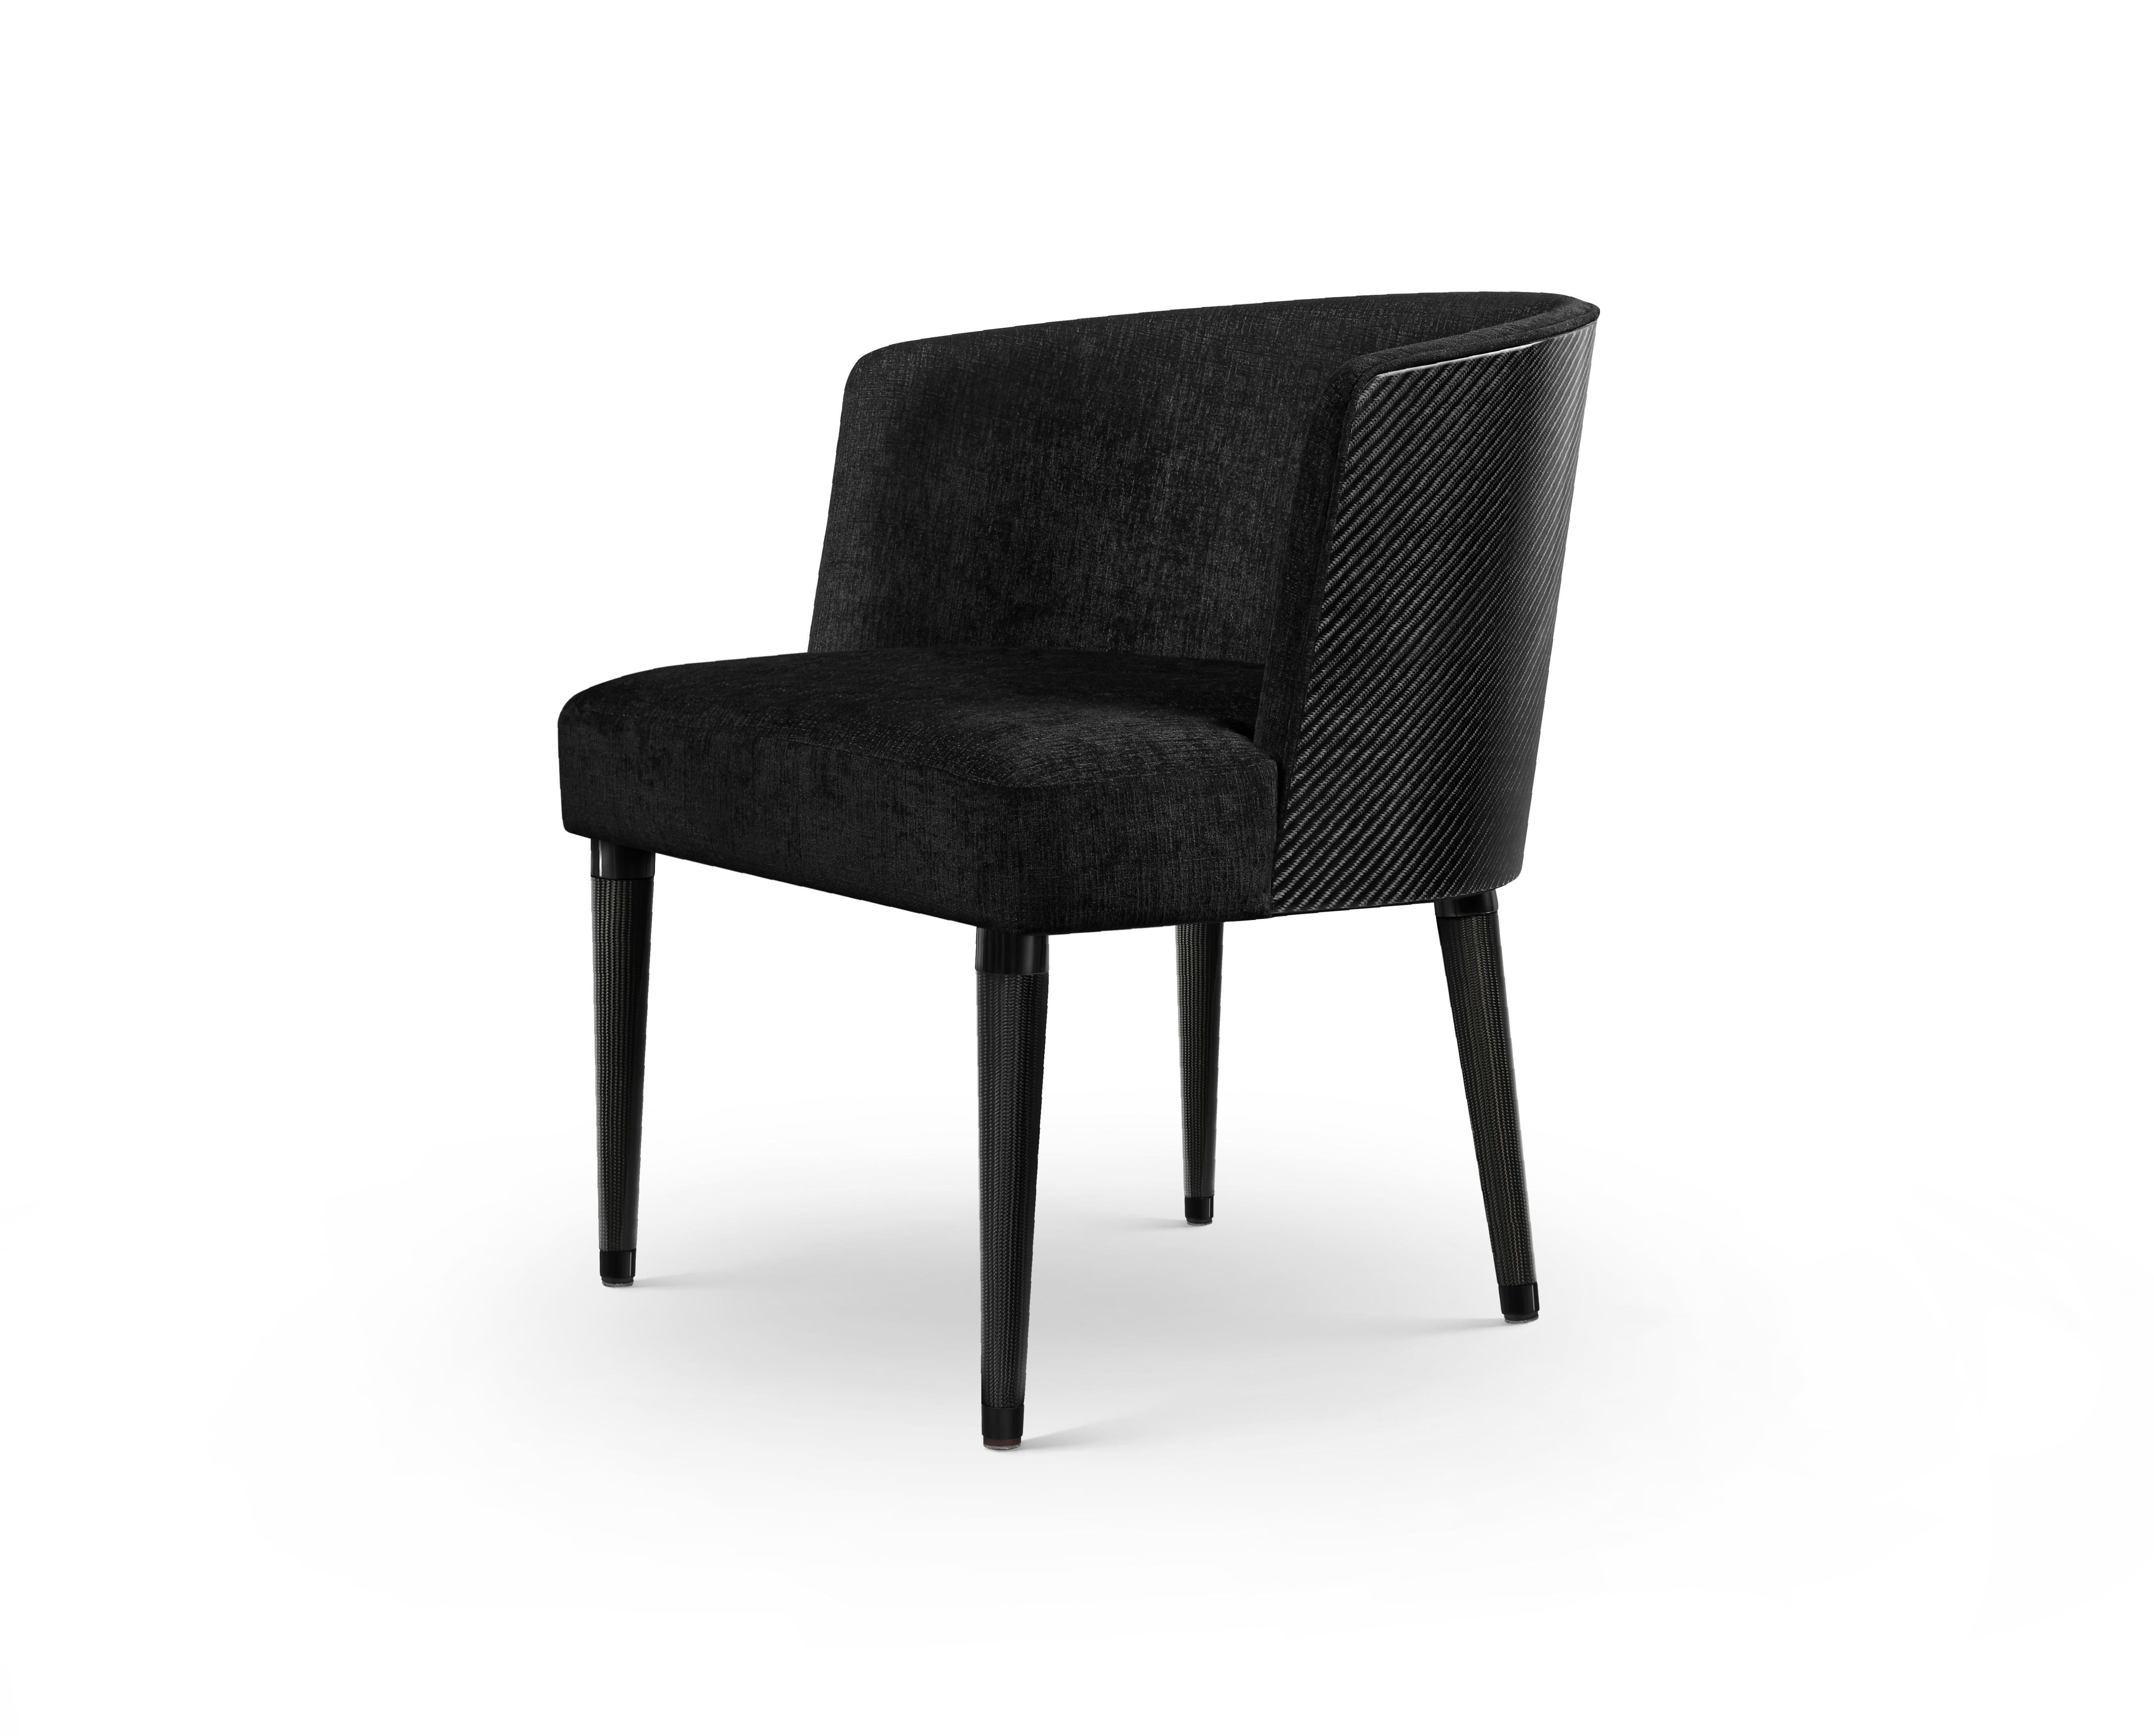 Carbon fibre and upholstered Norton armchair by Madheke
Dimensions: W 58 x D 61 x H 71.5 cm
Materials: Leather, fabric, wood, metal

NORTON's sleek glossy curves and contours are expertly crafted from carbon fibre at the back and leg which